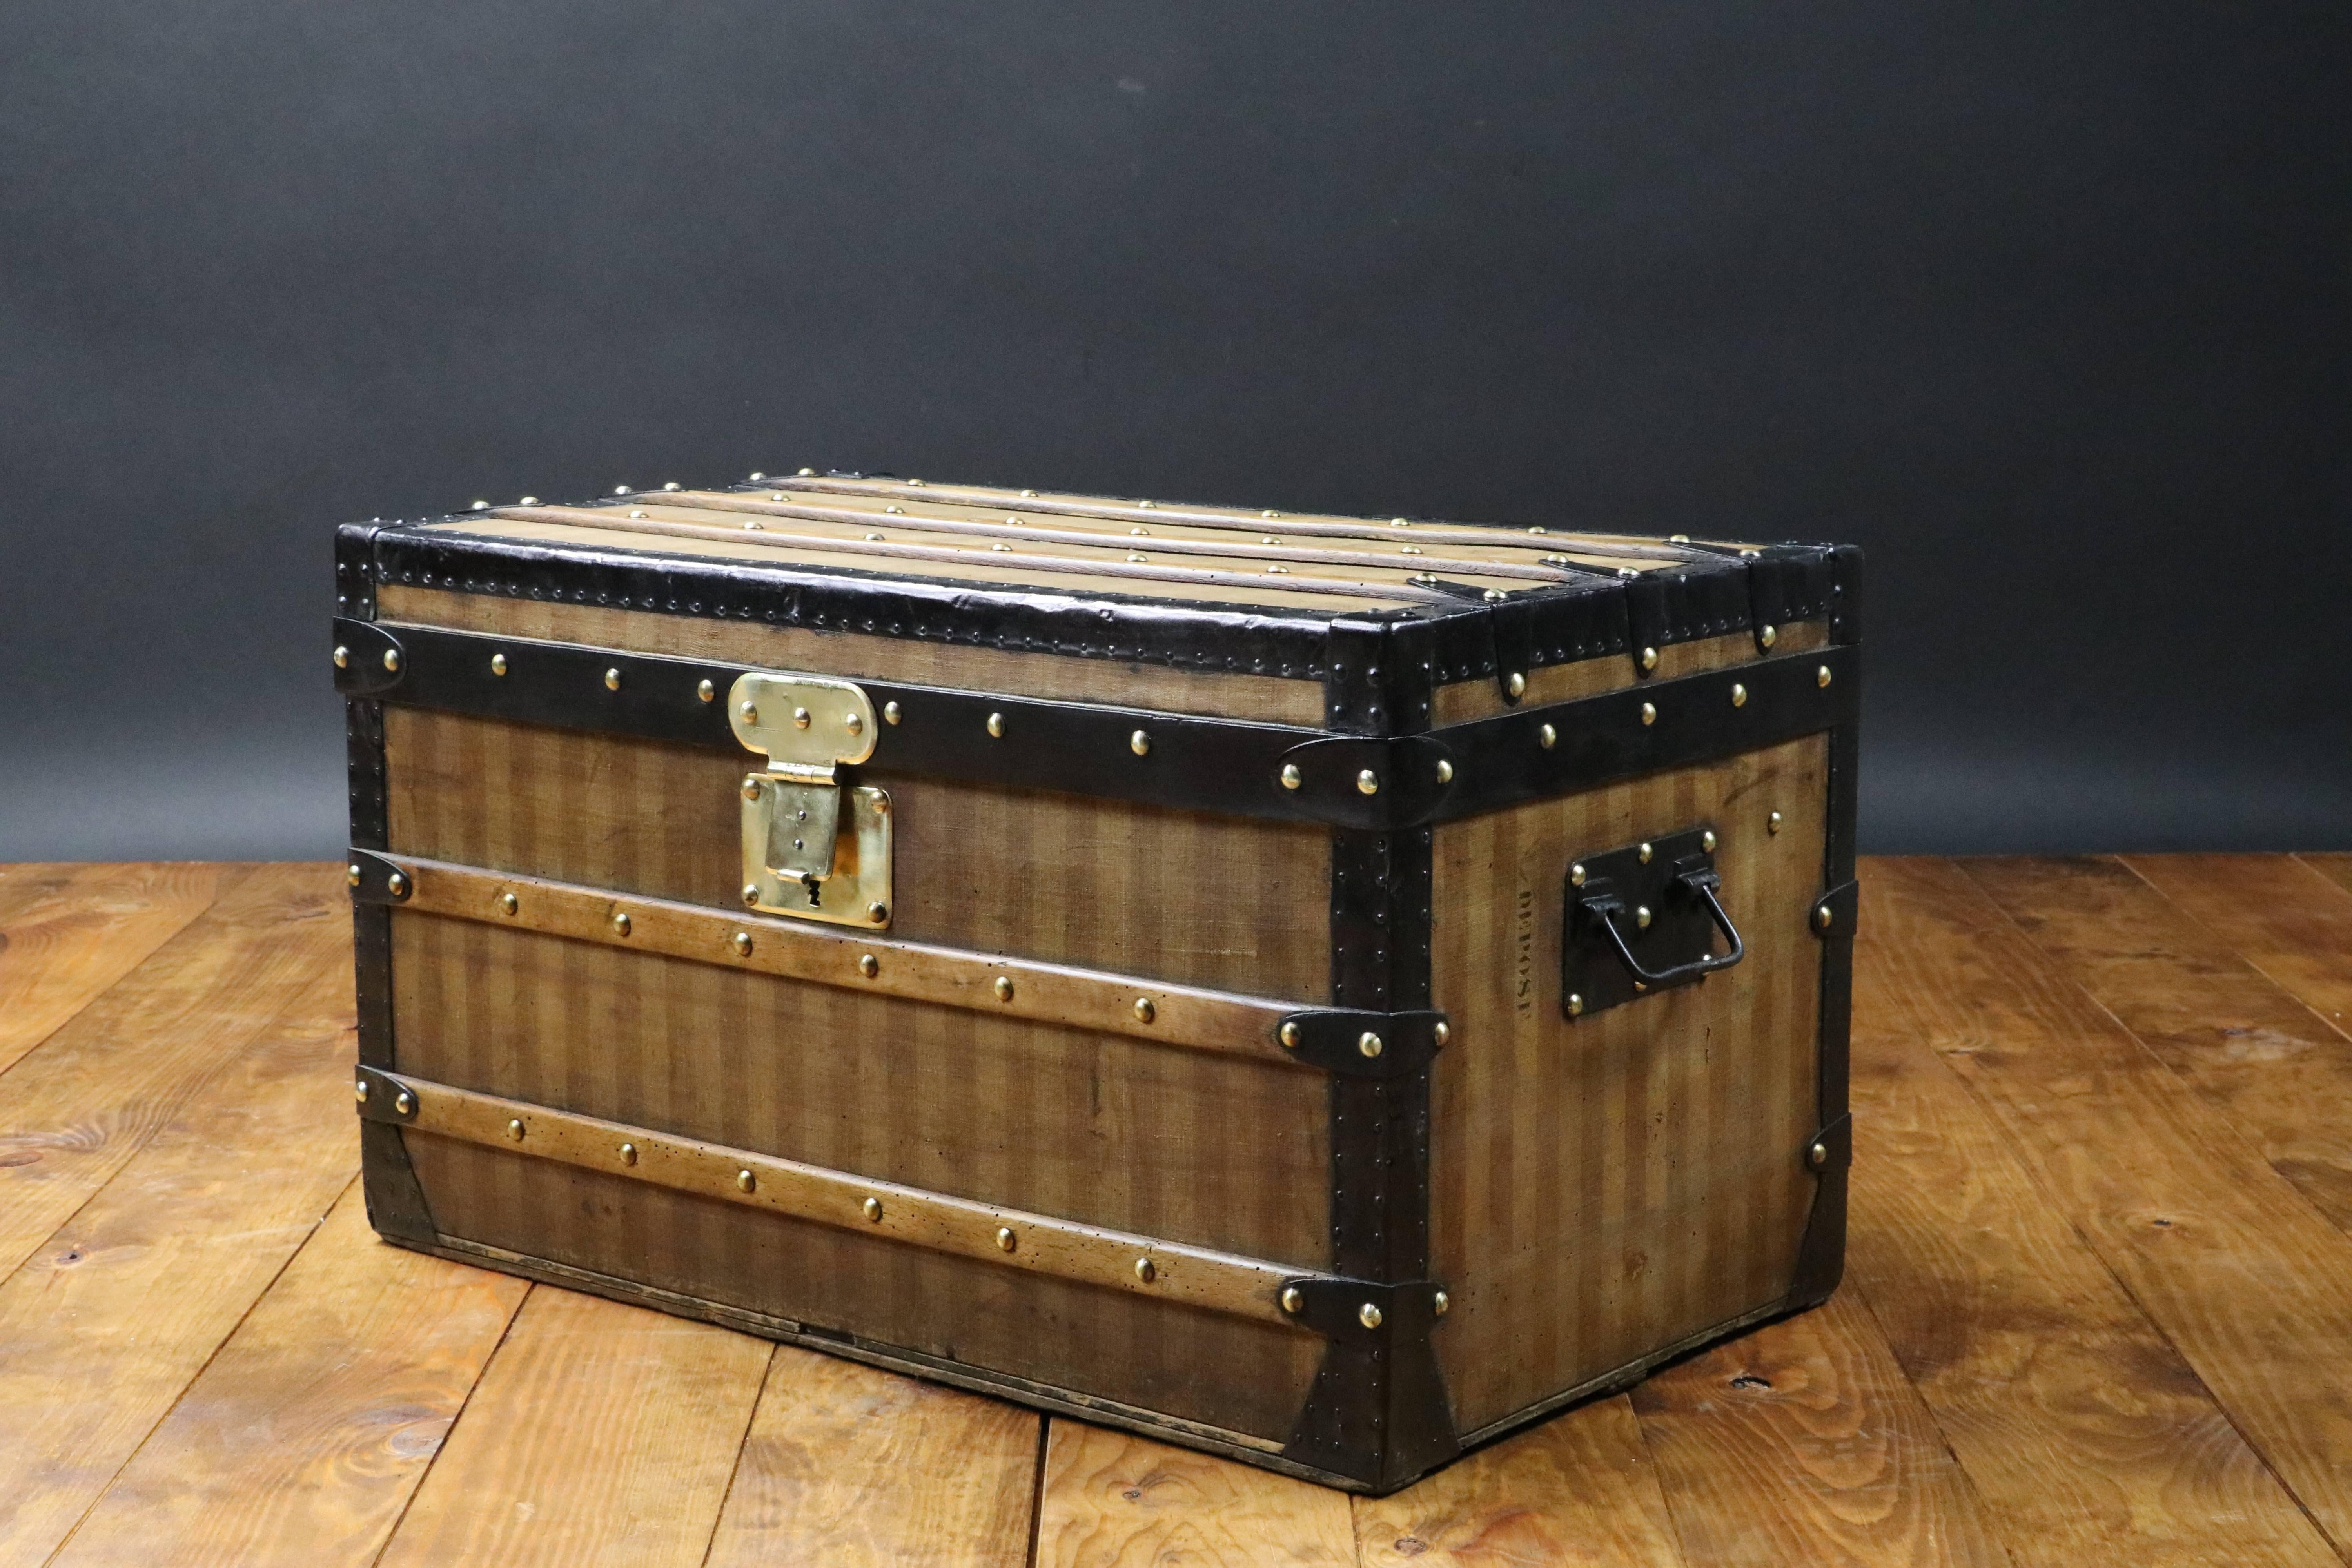 Louis Vuitton striped trunk.
Brass lock.
Steel handles.
Original inside.
A little part was change on the back
Bottom gray Trianon marked Vuitton,
1880 circa.
Size in cm 70 cm wide x 40 cm high x 41 cm deep.

All the trunks we sell have been